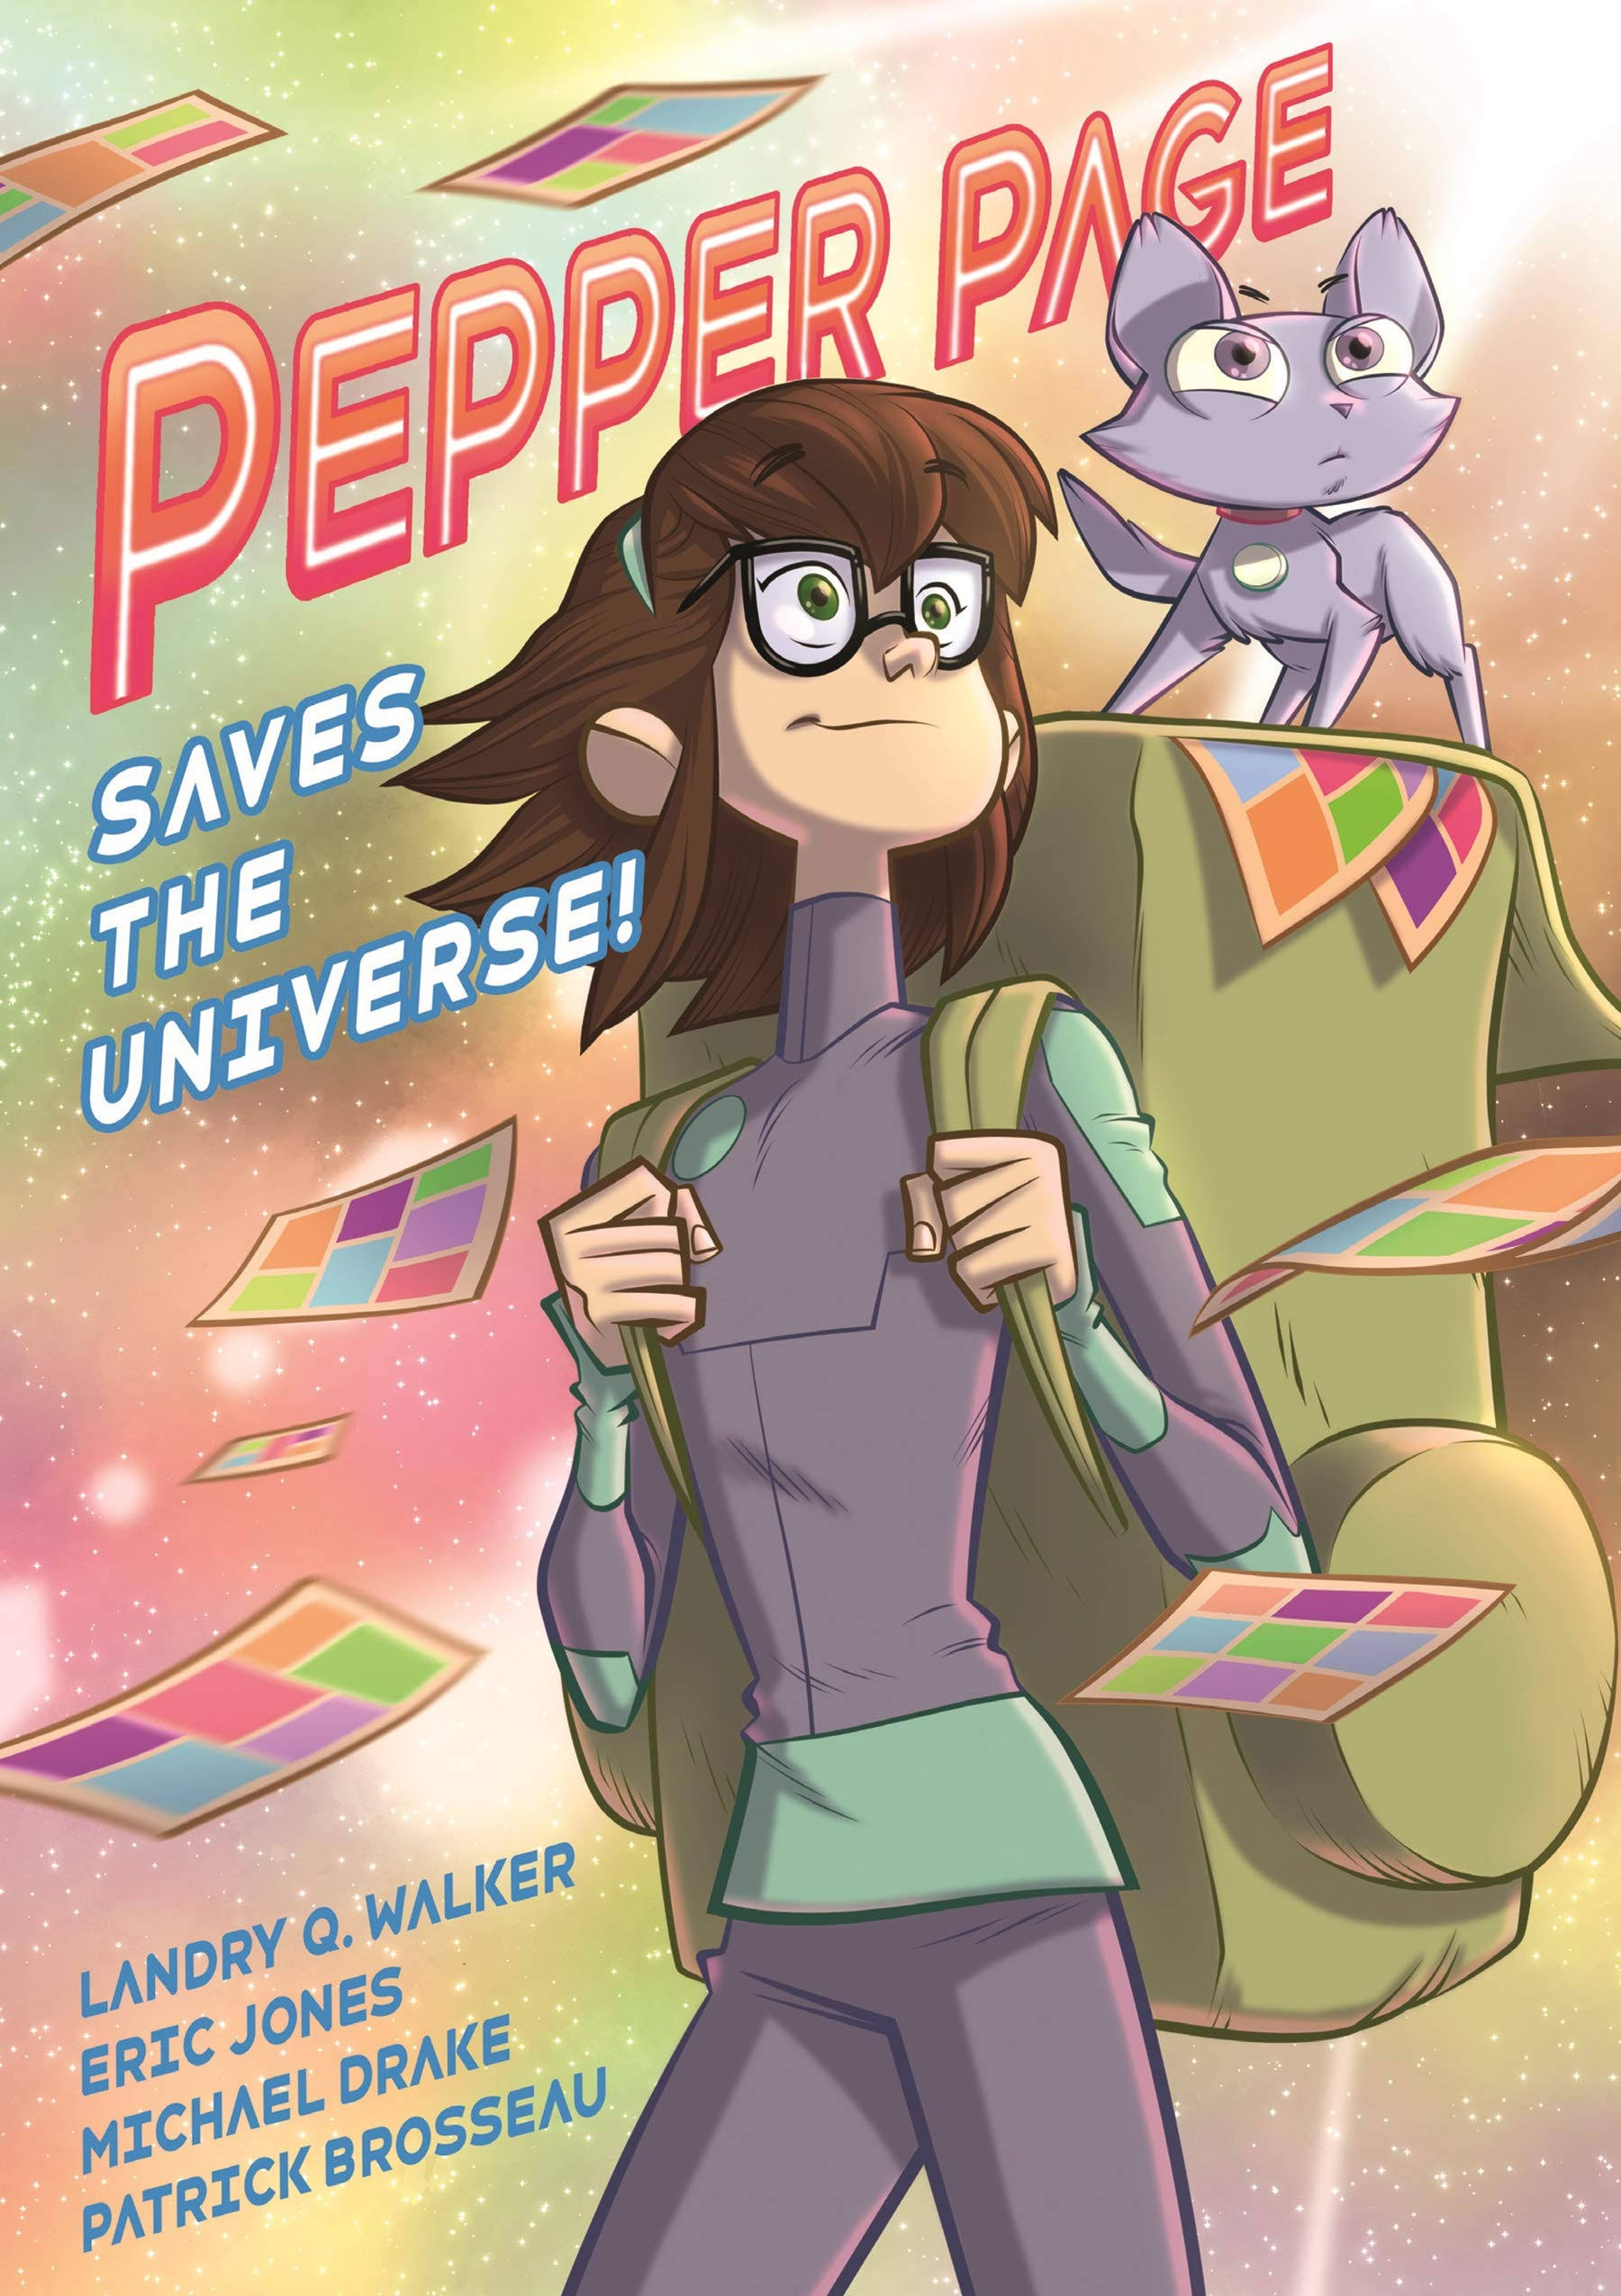 Pepper Page Saves the Universe! by Landry Q. Walker